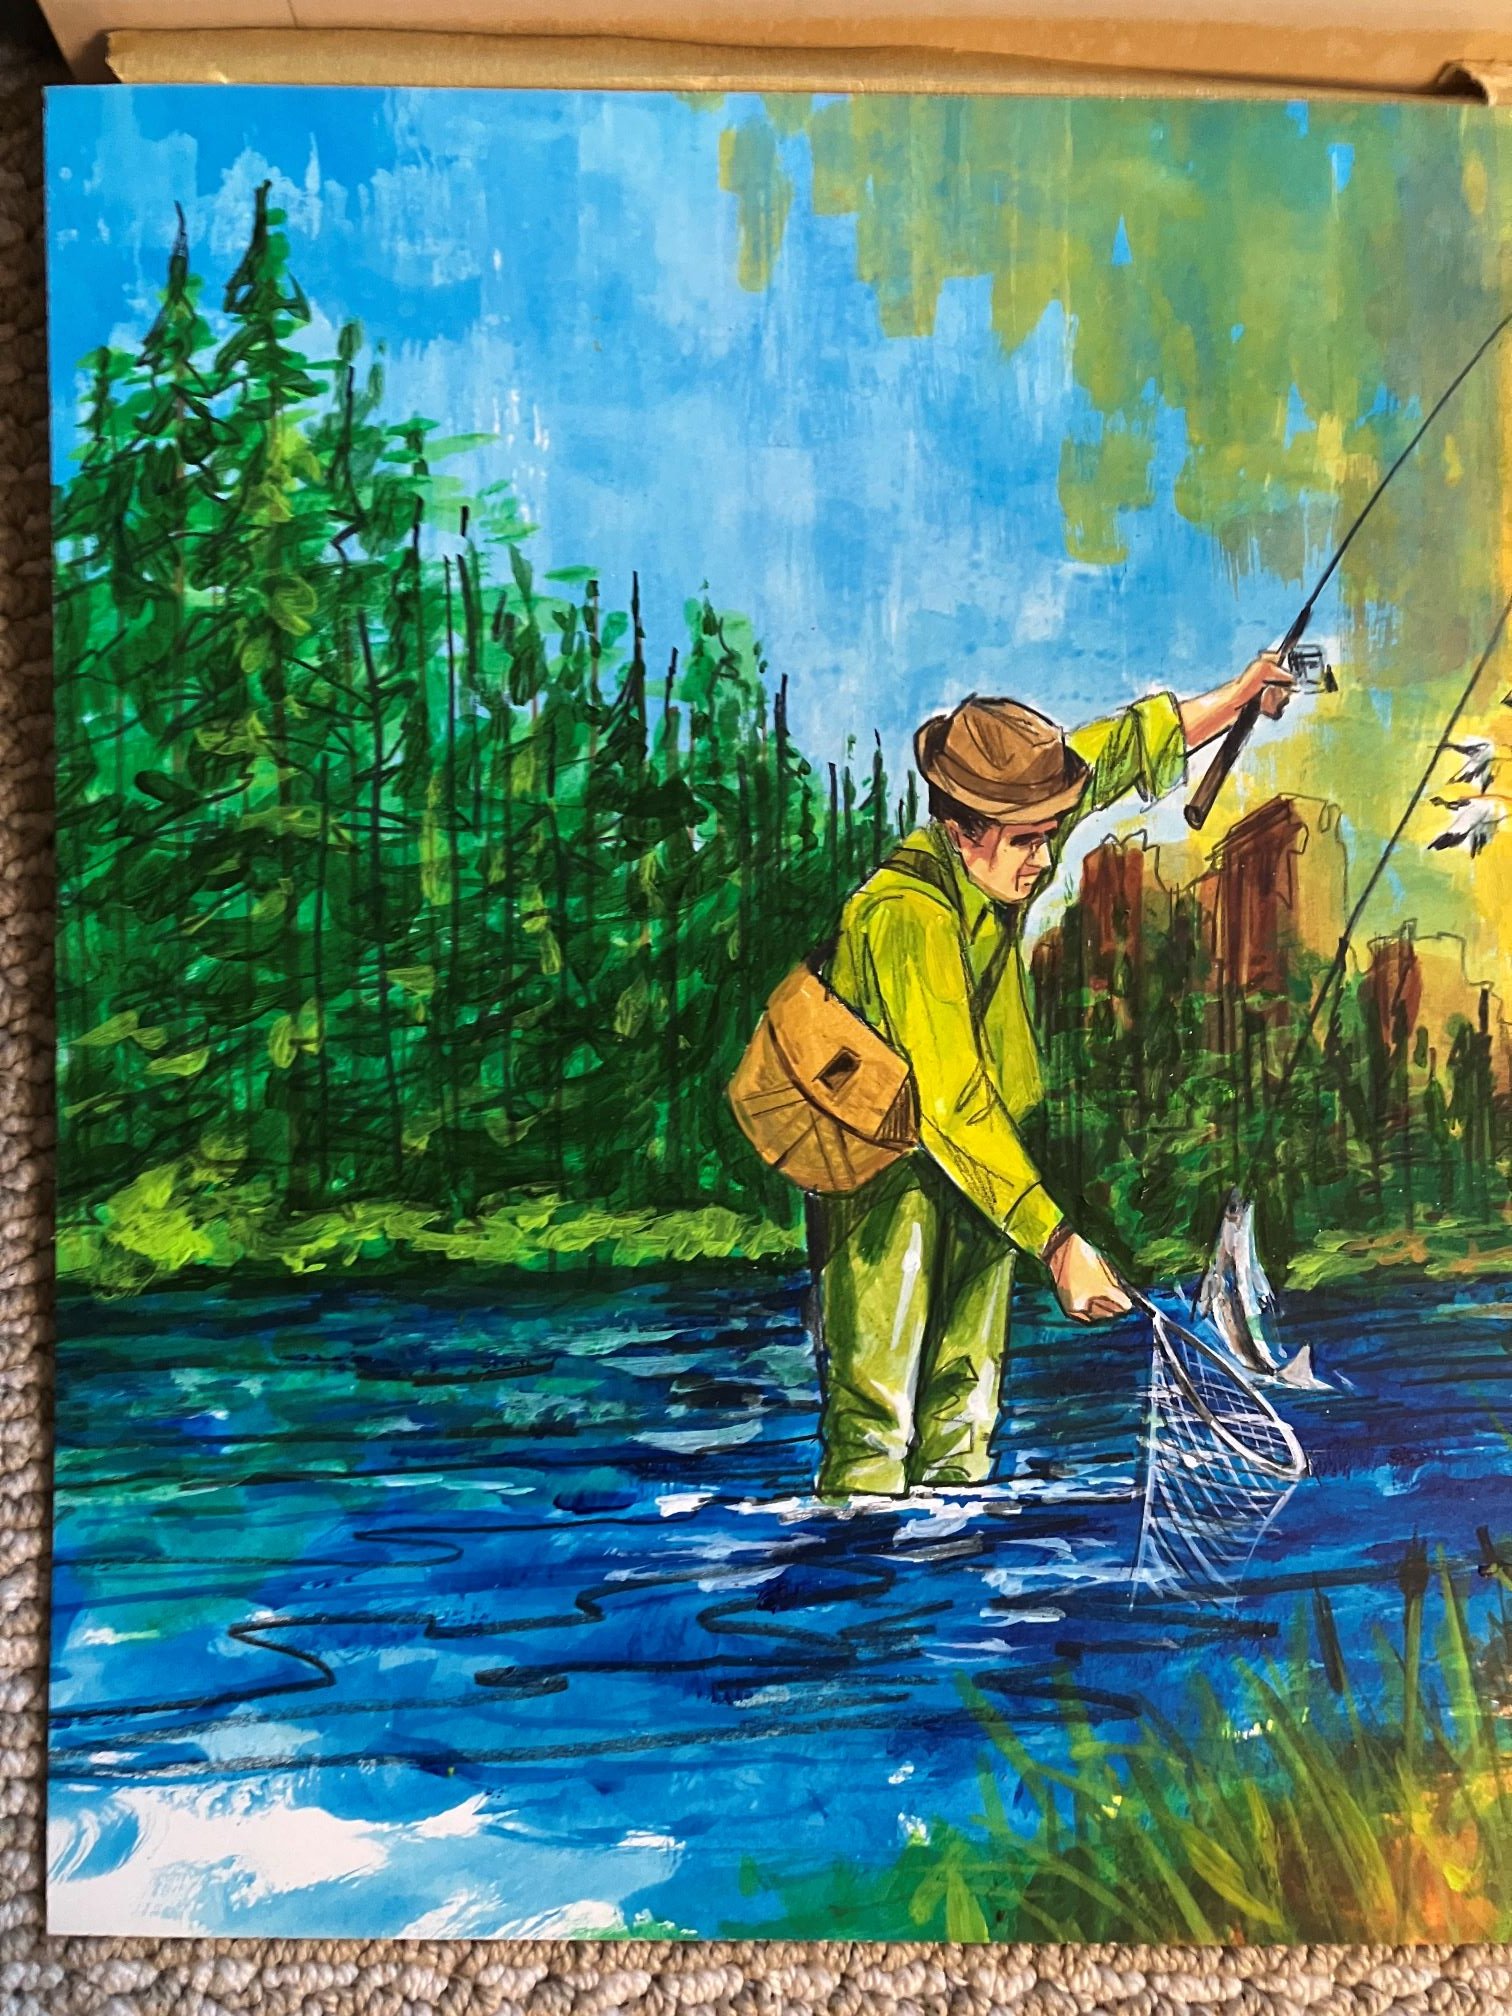 Hunting and fly fishing painting any thoughts?